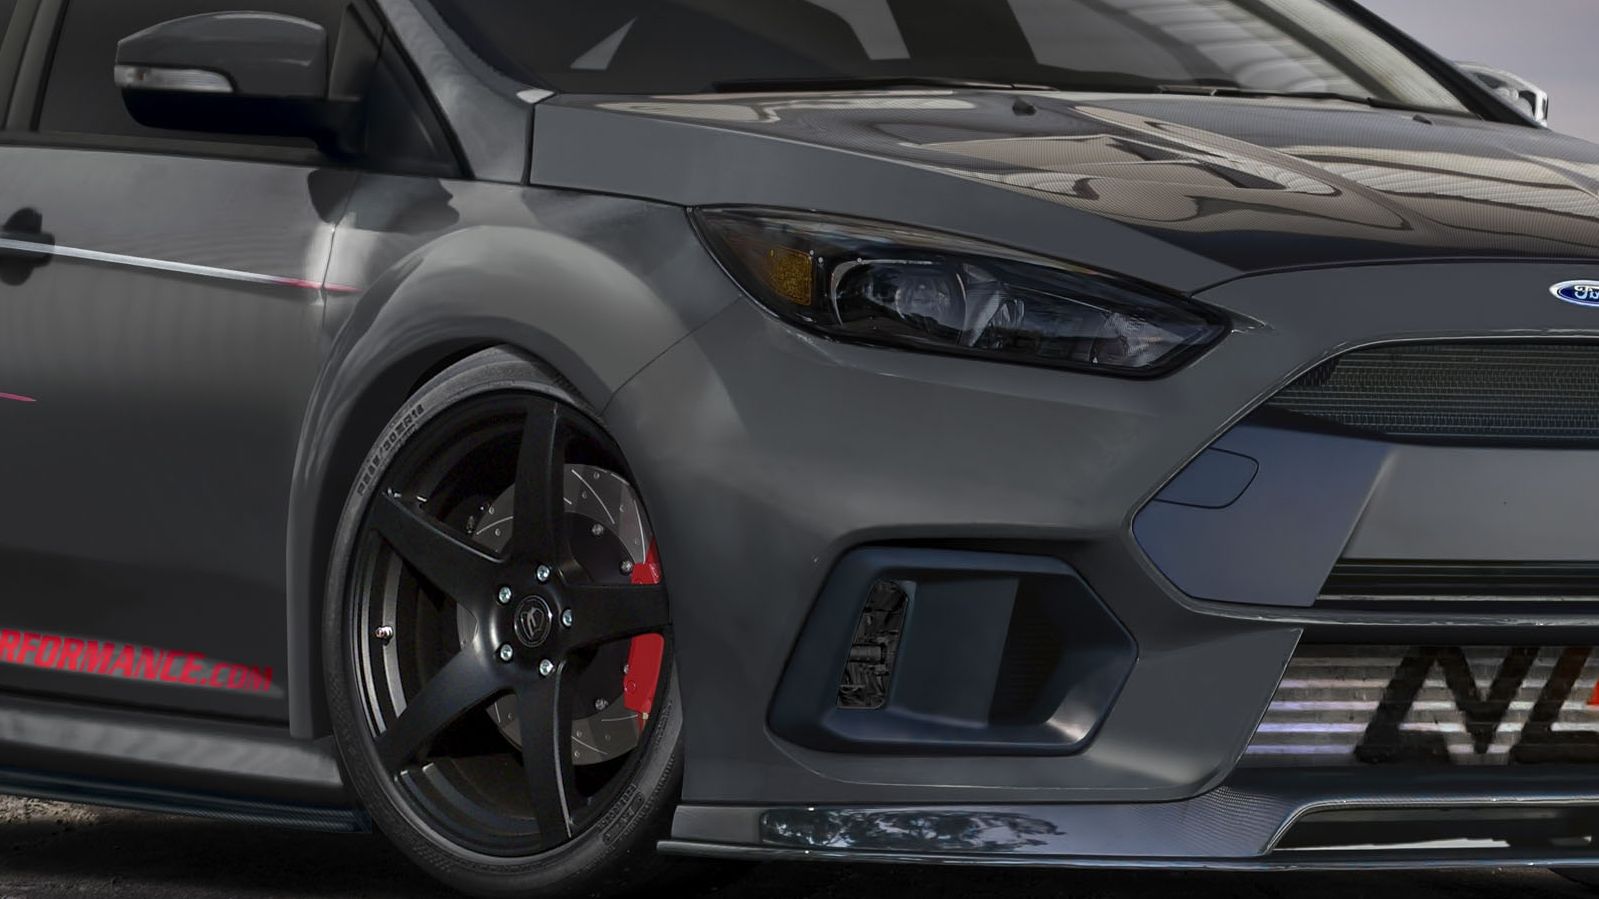 2017 Ford Focus RS “TriAthlete” by VMP Performance